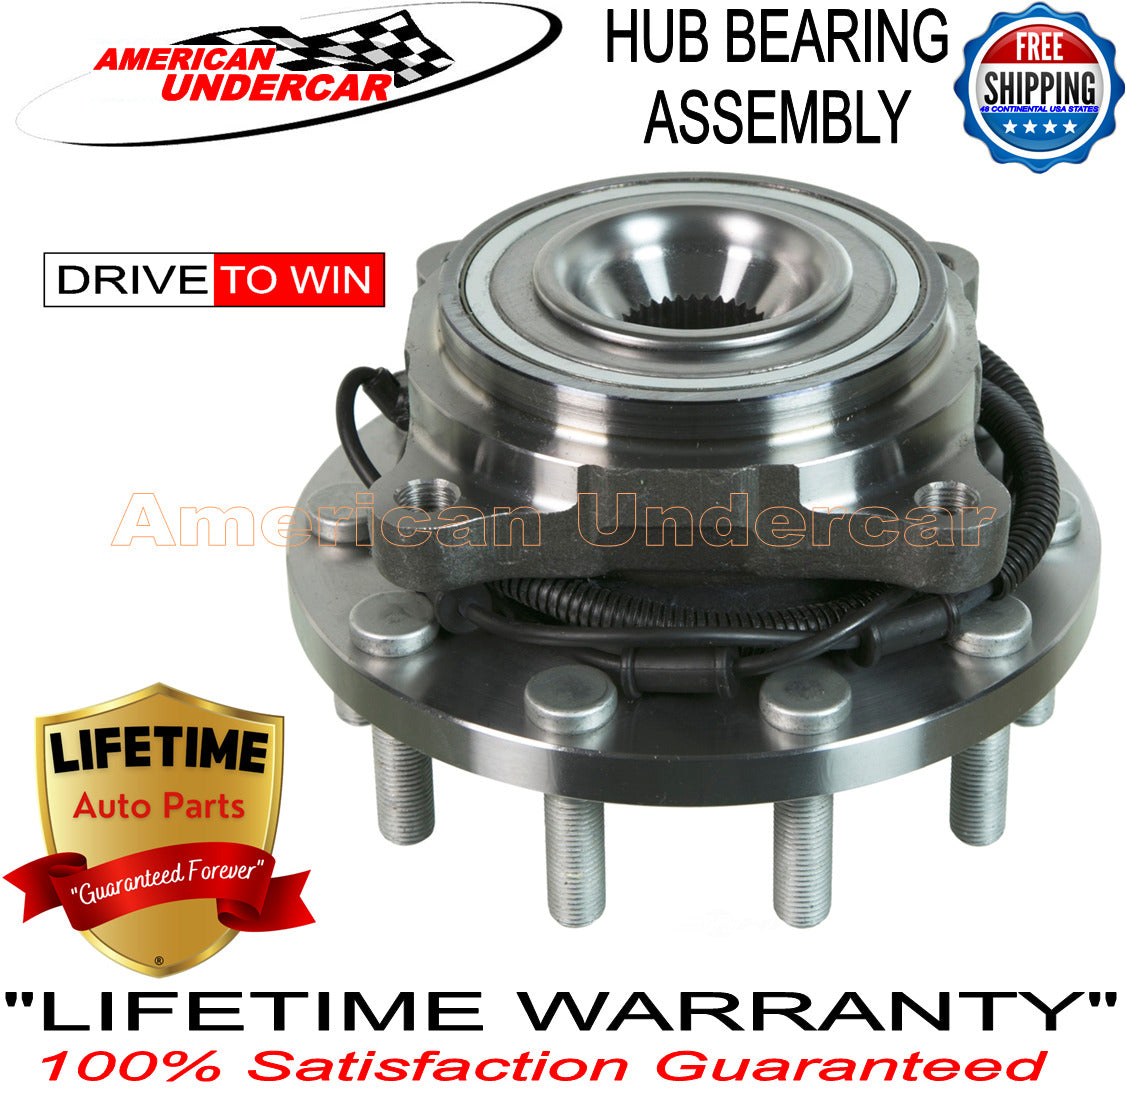 Lifetime Hub Bearing Assembly for 2008-2018 Dodge Ram 4500, 5500 4x4, 2WD